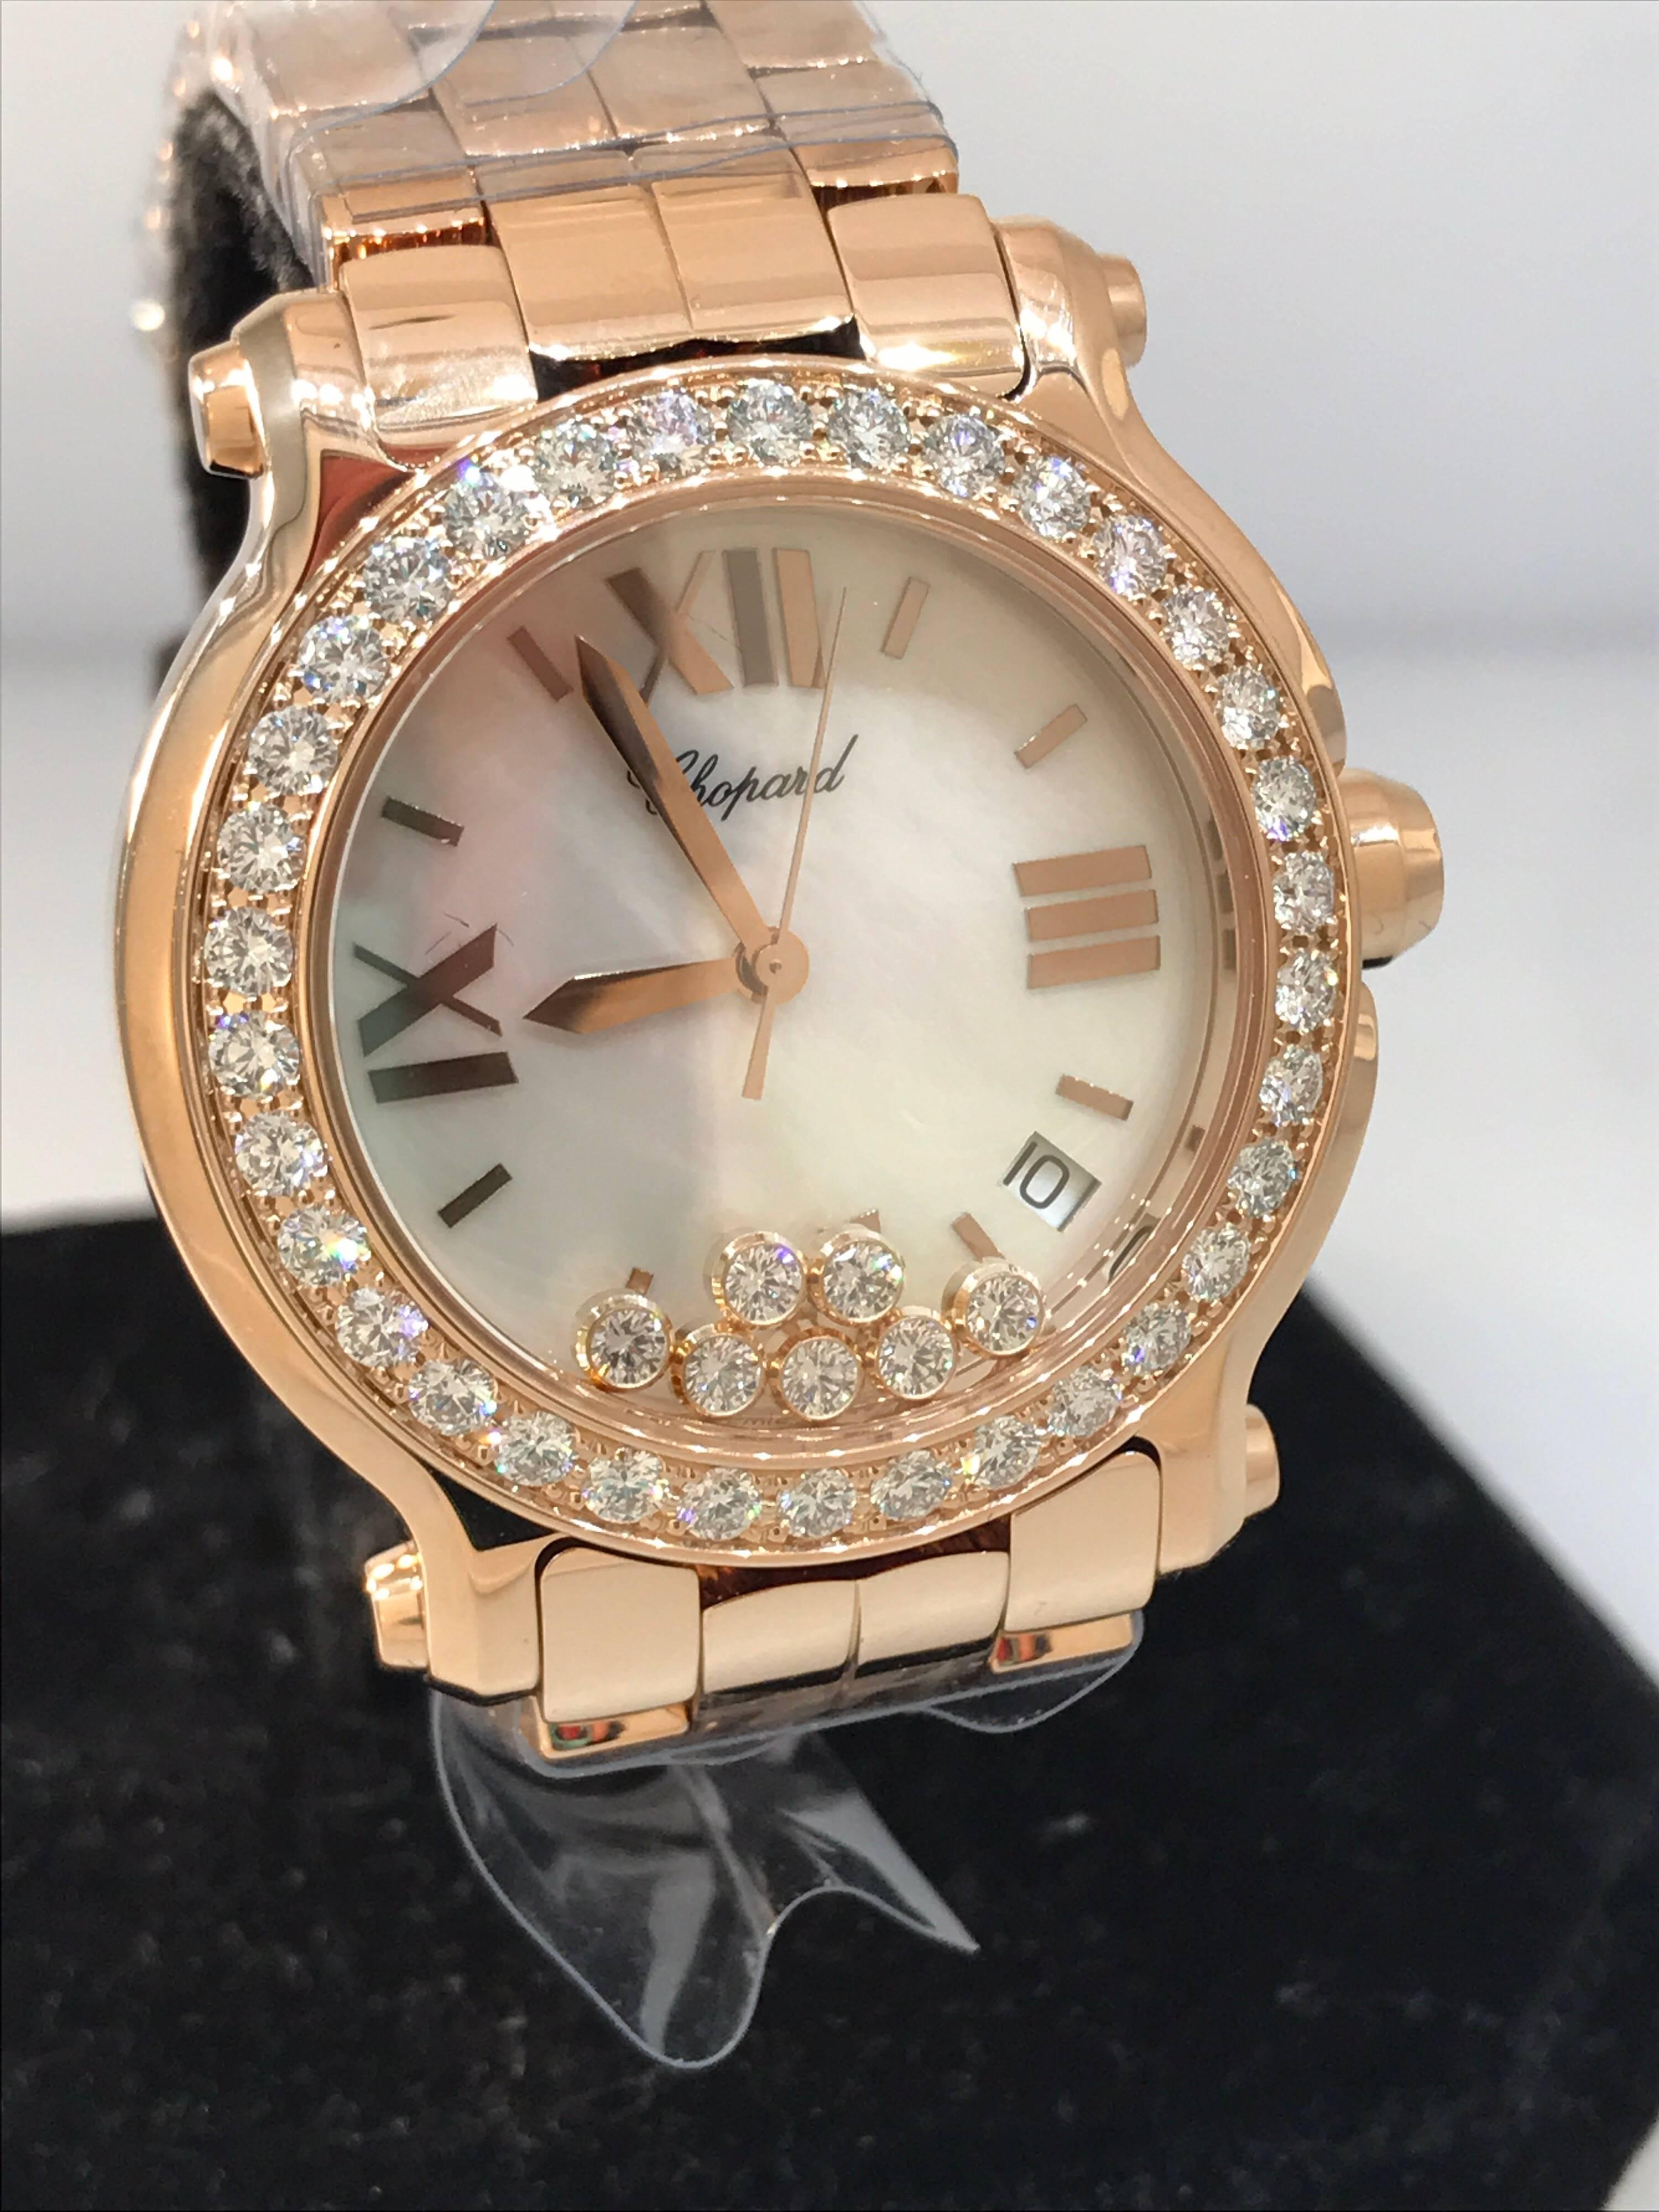 Chopard Happy Sport Ladies Watch

Model Number: 27/7481-5002

100% Authentic

Brand New

Comes with original Chopard box, certificate of authenticity and warranty and instruction manual

18 Karat Rose Gold & Bracelet (135.80gr)

Scratch Resistant